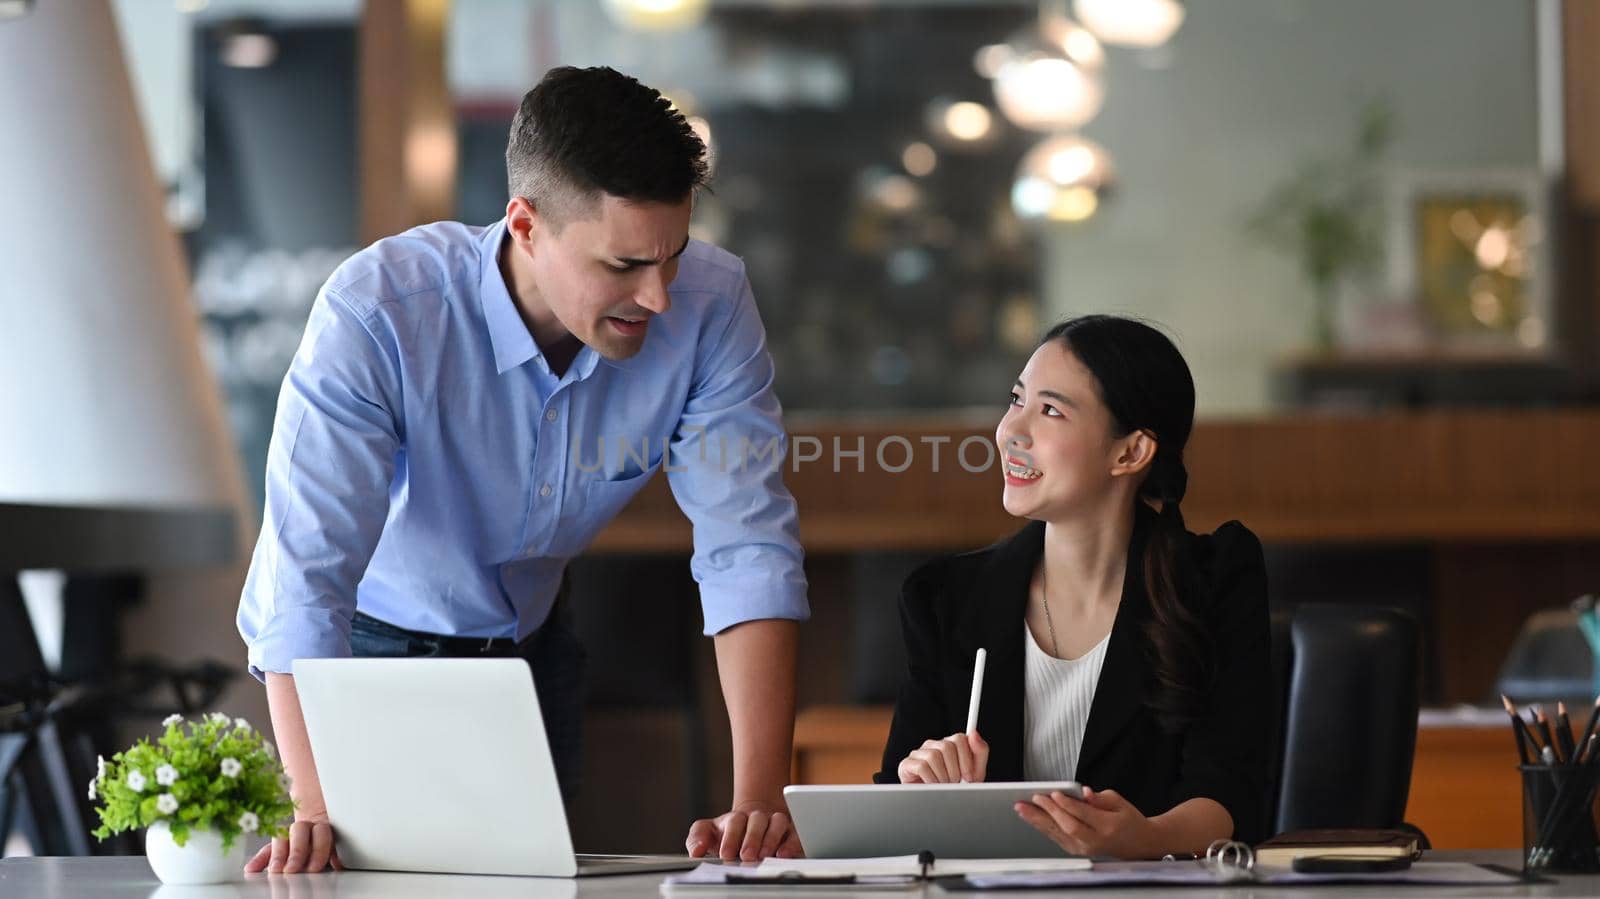 Two smiling businesspeople discussing working together in bright office.